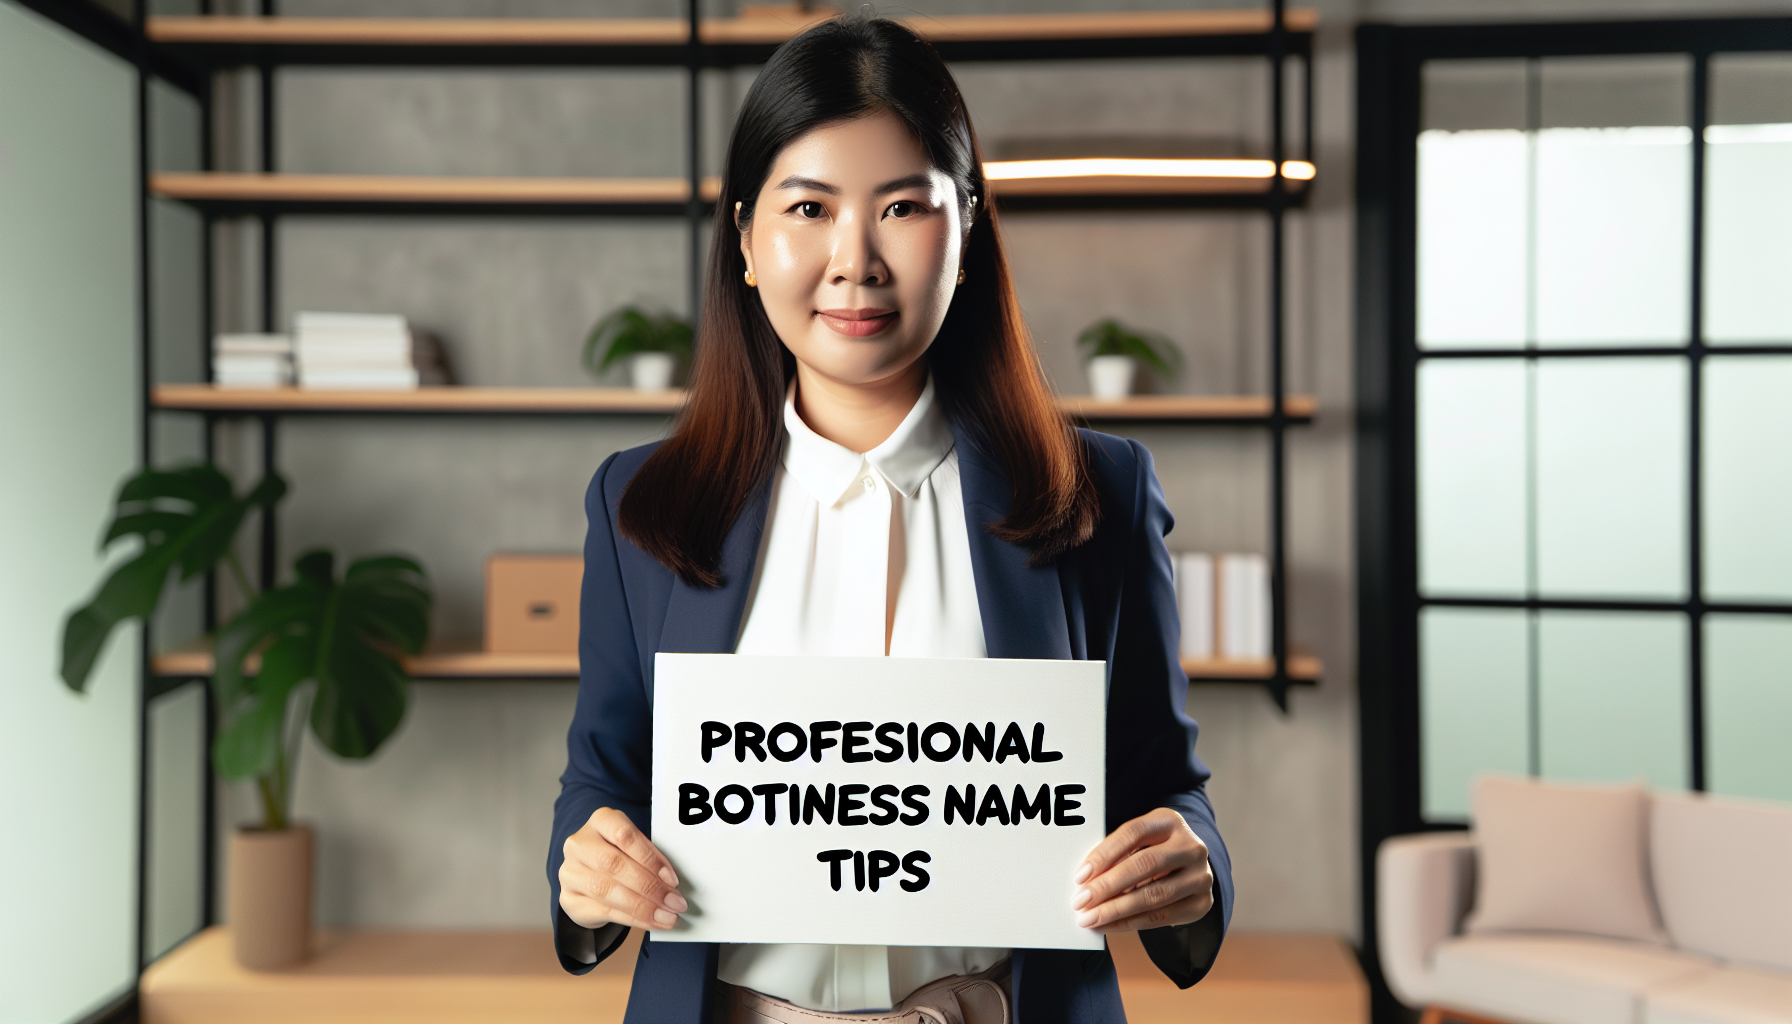 Professional notary business name tips